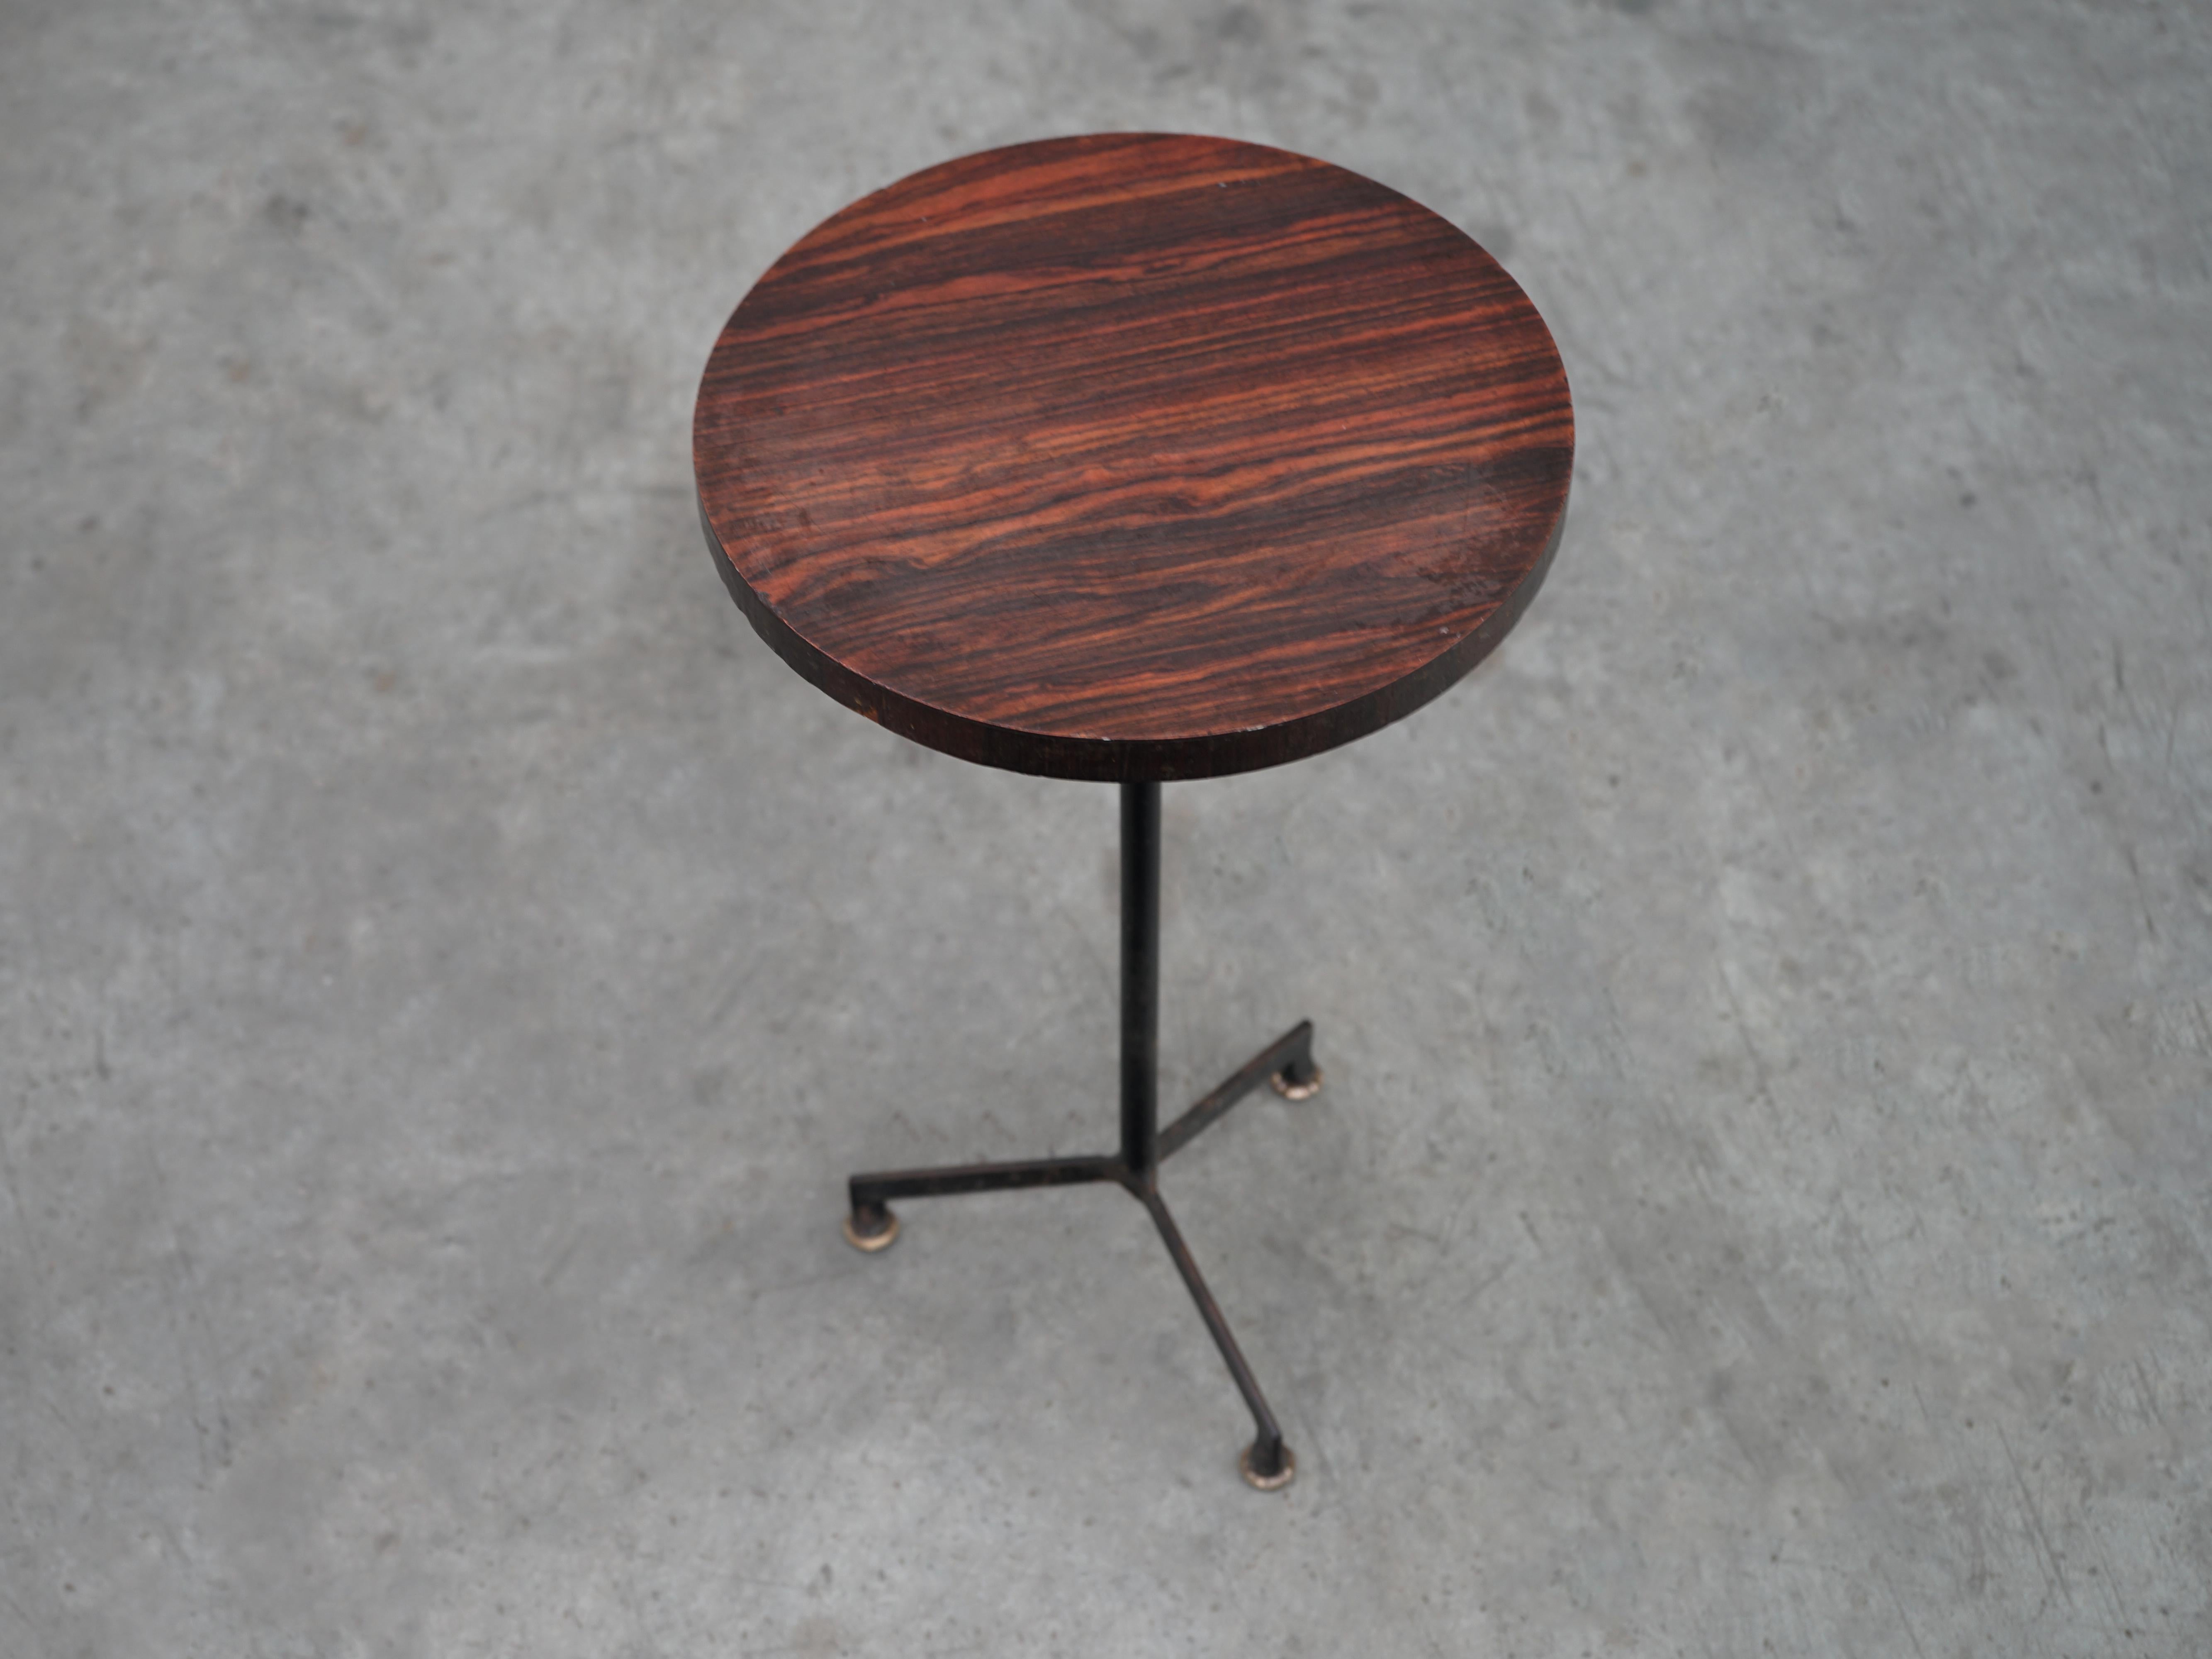 Mid-20th Century Round Side Table by Carlo Hauner and Martin Eisler, Brazilian Midcentury Design